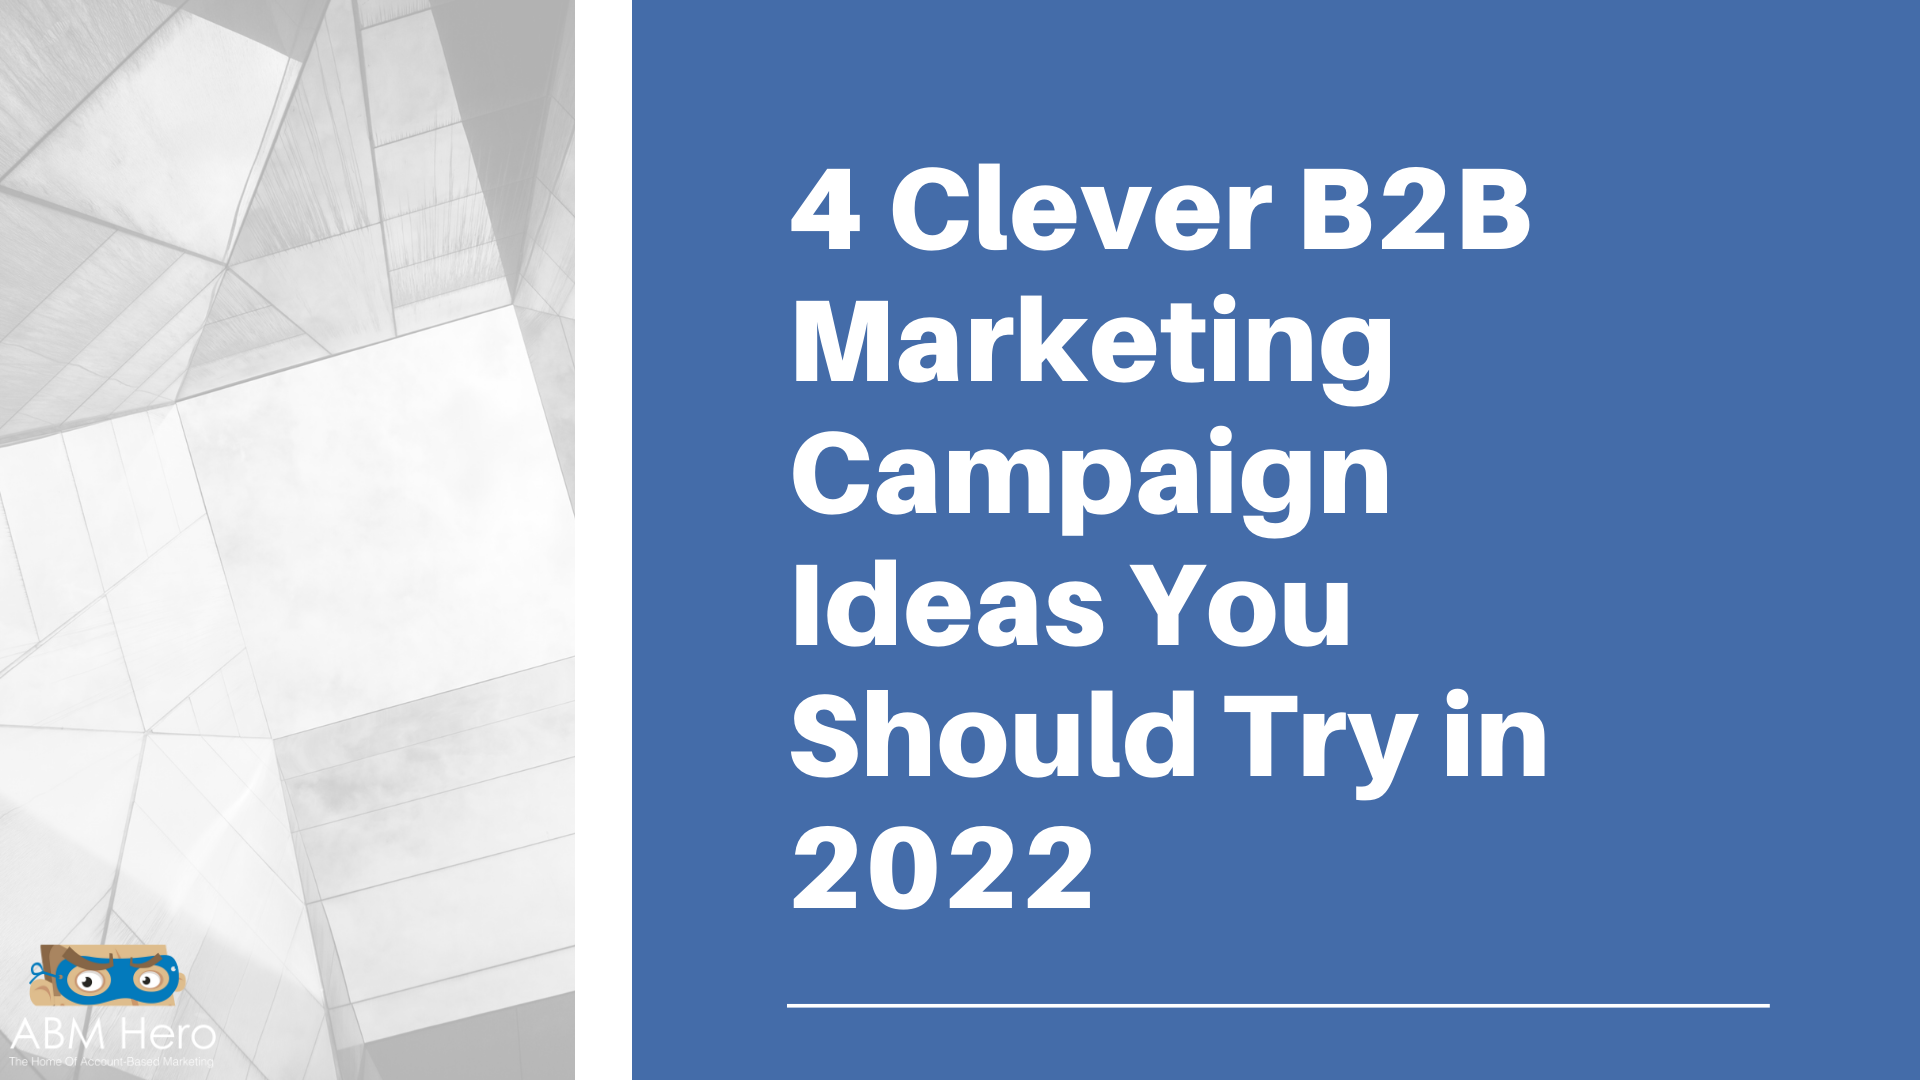 4 Clever B2B Marketing Campaign Ideas You Should Try in 2022